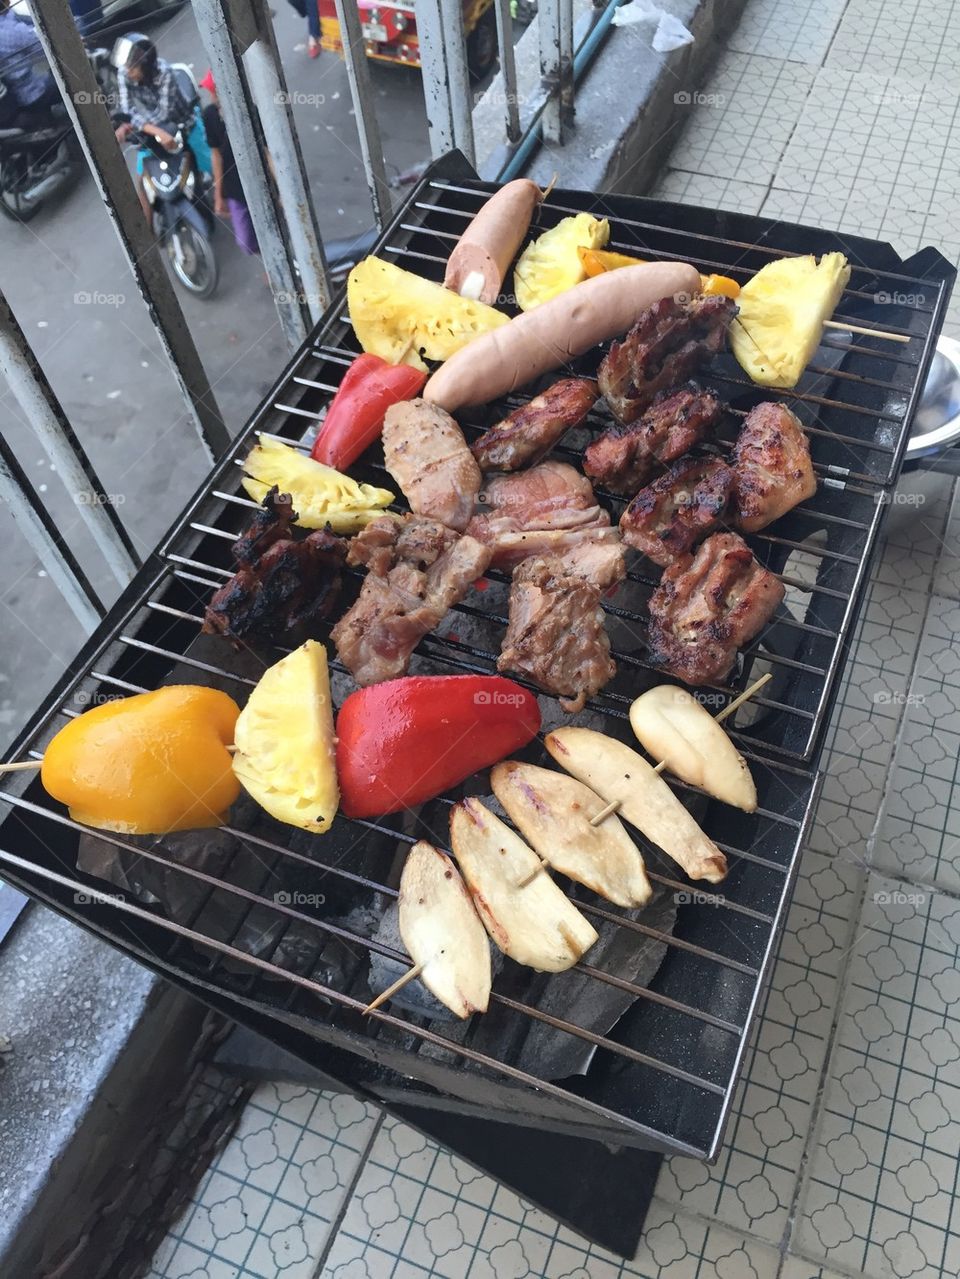 My little barbecue